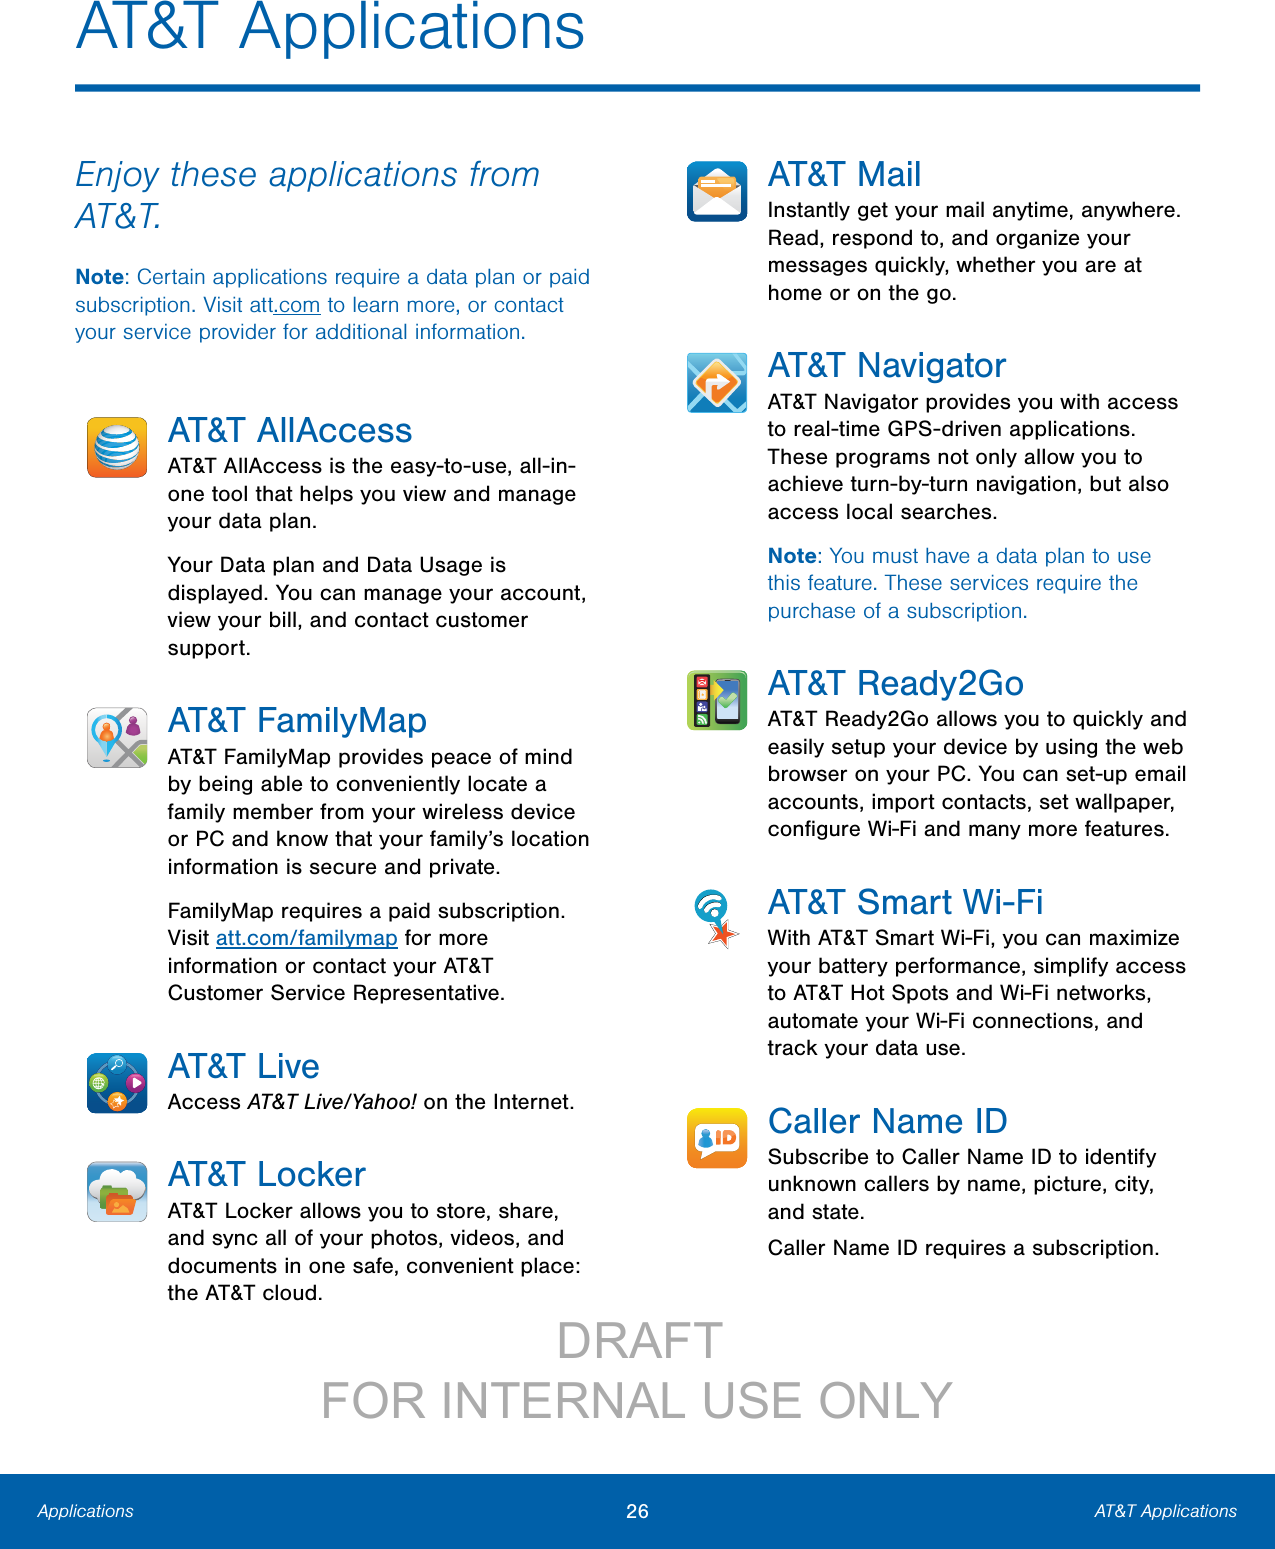 26 AT&amp;T ApplicationsApplicationsAT&amp;T ApplicationsEnjoy these applications from AT&amp;T.Note: Certain applications require a data plan or paid subscription. Visit att.com to learn more, or contact your service provider for additional information.AT&amp;T AllAccessAT&amp;T AllAccess is the easy-to-use, all-in-one tool that helps you view and manage your data plan.Your Data plan and Data Usage is displayed. You can manage your account, view your bill, and contact customer support.AT&amp;T FamilyMapAT&amp;T FamilyMap provides peace of mind by being able to conveniently locate a family member from your wireless device or PC and know that your family’s location information is secure and private.FamilyMap requires a paid subscription. Visit att.com/familymap for more information or contact your AT&amp;T Customer Service Representative.AT&amp;T LiveAccess AT&amp;T Live/Yahoo! on the Internet.AT&amp;T LockerAT&amp;T Locker allows you to store, share, and sync all of your photos, videos, and documents in one safe, convenient place: the AT&amp;T cloud.AT&amp;T MailInstantly get your mail anytime, anywhere. Read, respond to, and organize your messages quickly, whether you are at home or on the go.AT&amp;T NavigatorAT&amp;T Navigator provides you with access to real-time GPS-driven applications. These programs not only allow you to achieve turn-by-turn navigation, but also access local searches.Note: You must have a data plan to use this feature. These services require the purchase of a subscription.AT&amp;T Ready2GoAT&amp;T Ready2Go allows you to quickly and easily setup your device by using the web browser on your PC. You can set-up email accounts, import contacts, set wallpaper, conﬁgure Wi-Fi and many more features.AT&amp;T Smart Wi-FiWith AT&amp;T Smart Wi-Fi, you can maximize your battery performance, simplify access to AT&amp;T Hot Spots and Wi-Fi networks, automate your Wi-Fi connections, and track your data use.Caller Name IDSubscribe to Caller Name ID to identify unknown callers by name, picture, city, and state.Caller Name ID requires a subscription.                 DRAFT FOR INTERNAL USE ONLY